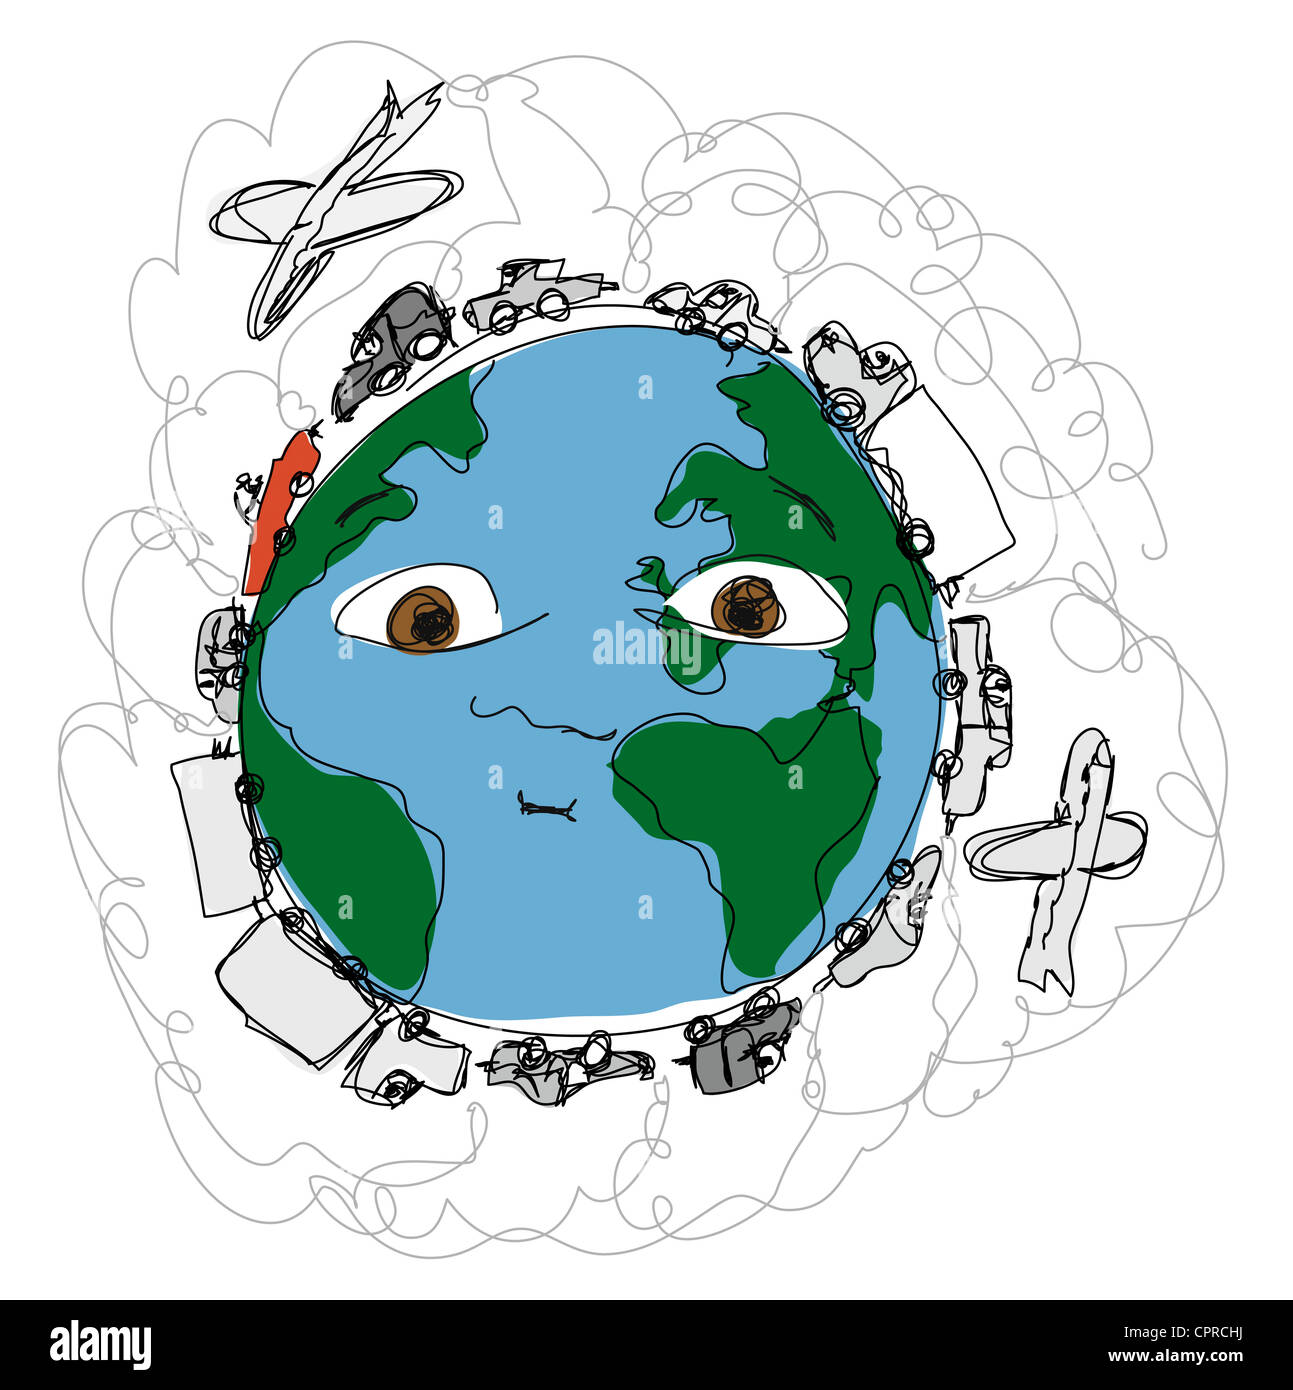 Pollution of earth. Earth holding breath, overloaded with traffic. Stock Photo